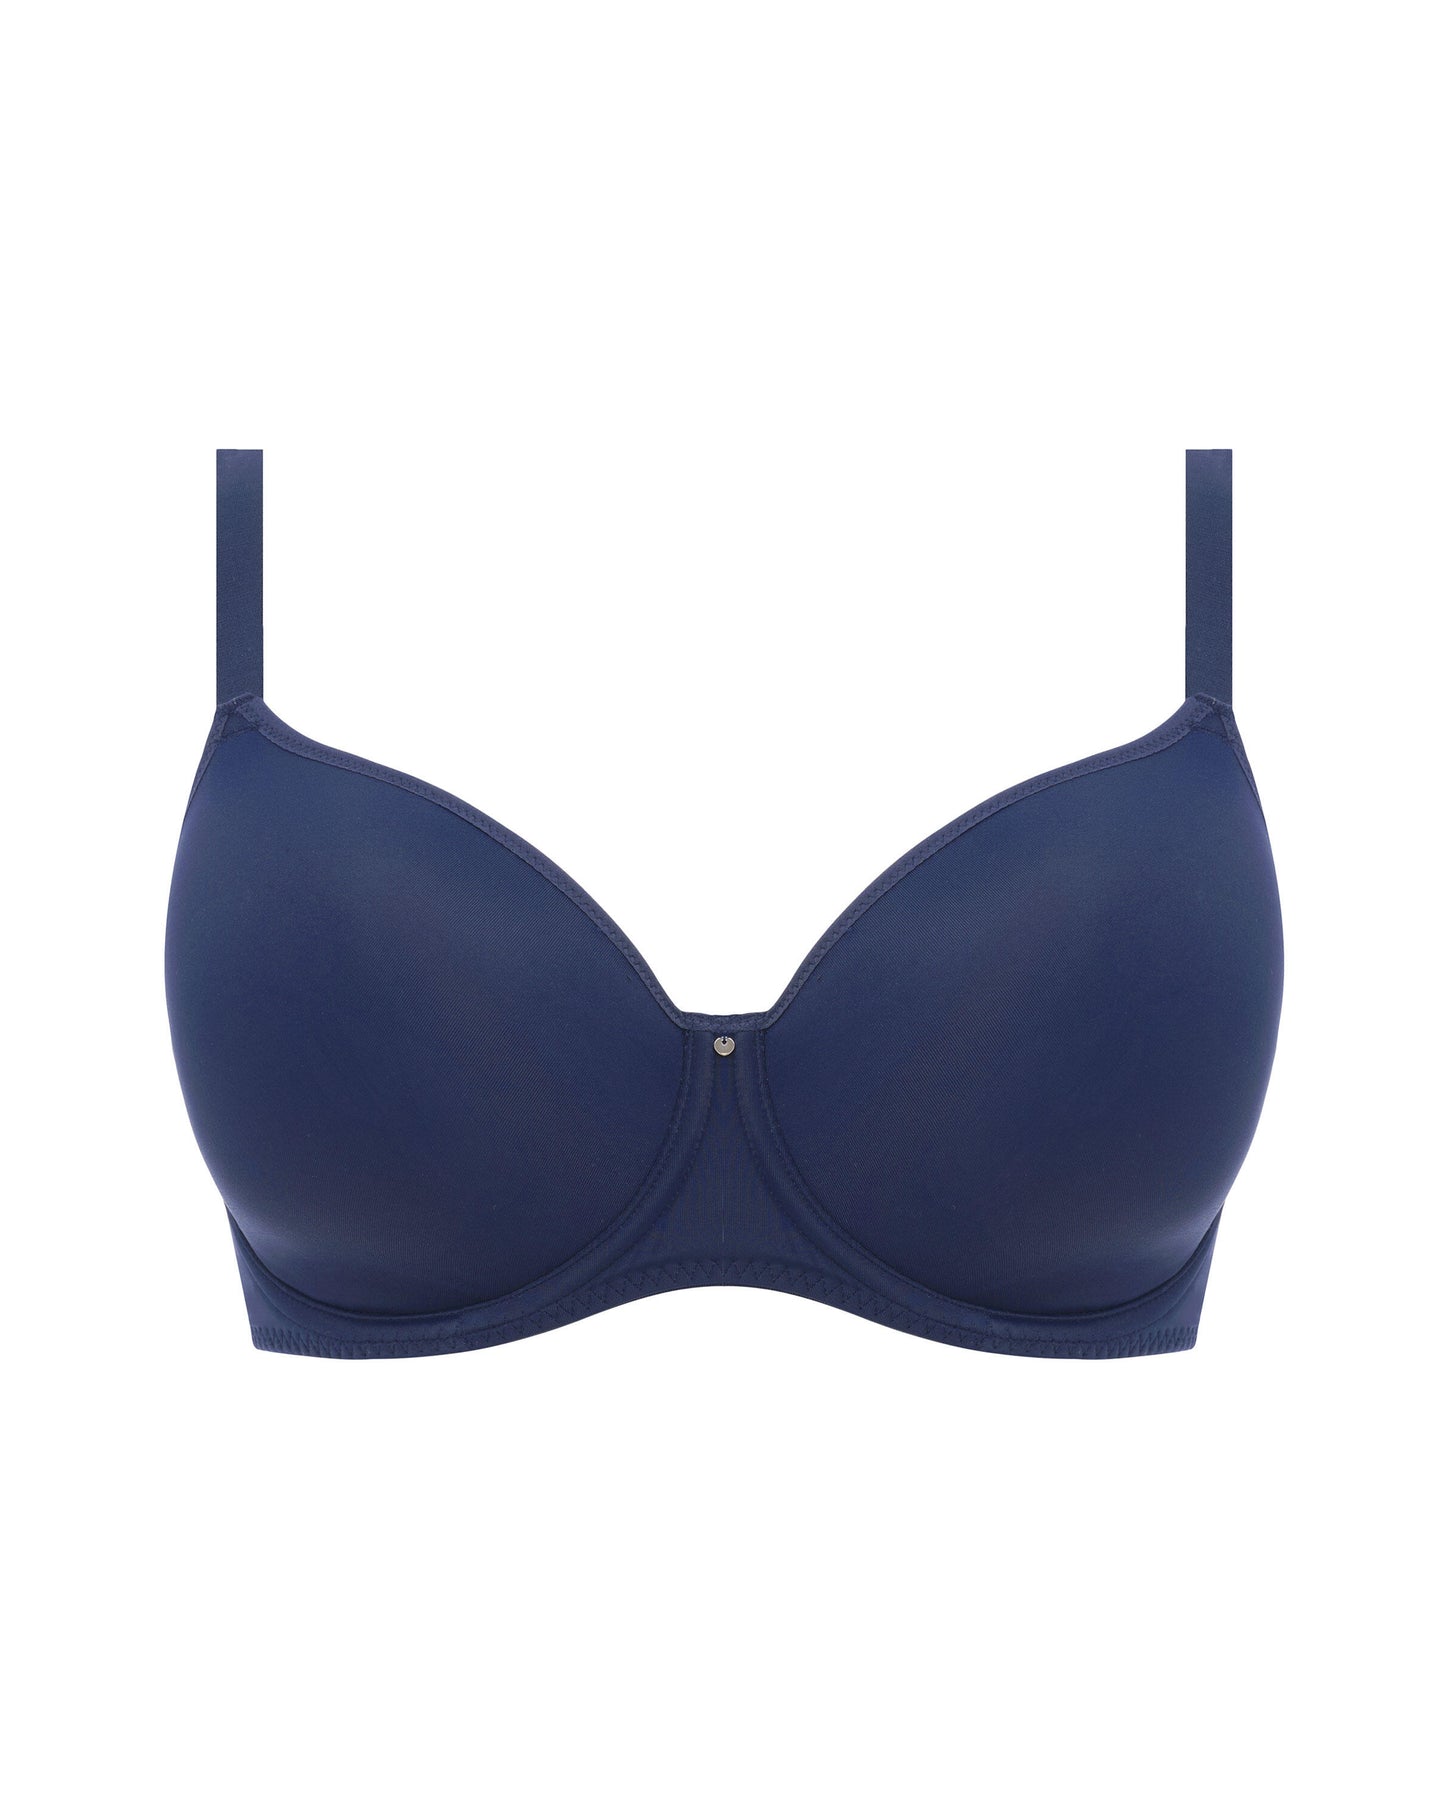 Fantasie Aura Underwire Molded T-Shirt Bra (More colors available) - FL2321